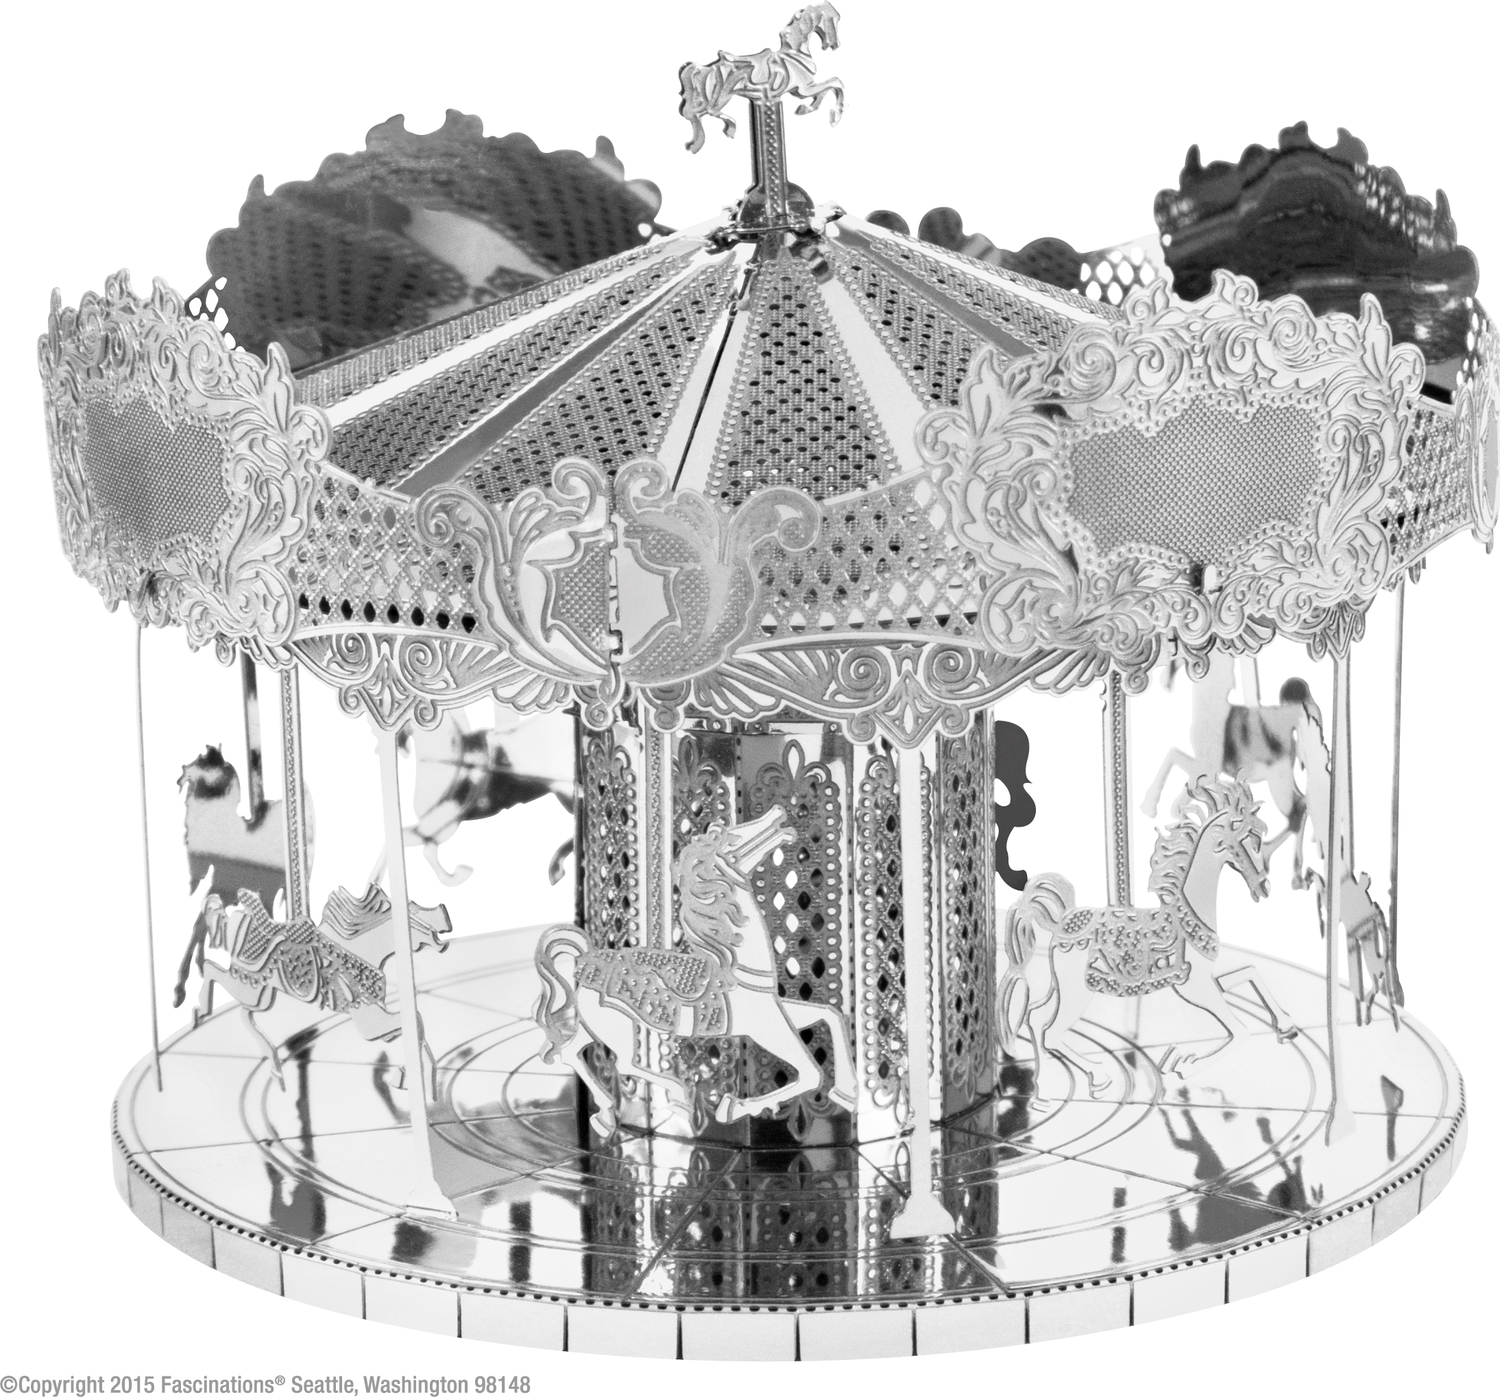 merry-go-round-junction-hobbies-and-toys